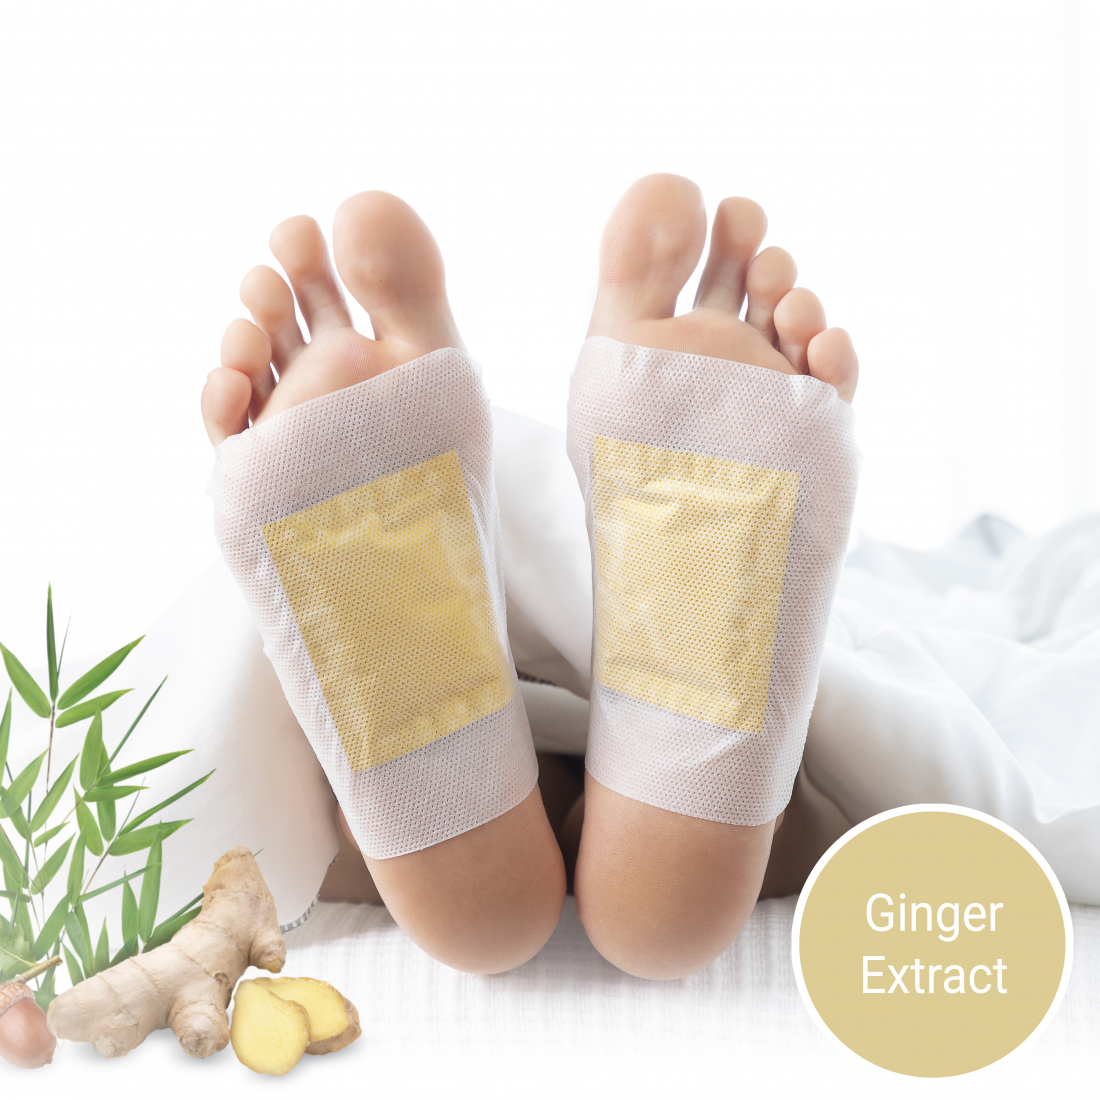 'Ginger Detox' Foot Patches - 10 Pieces